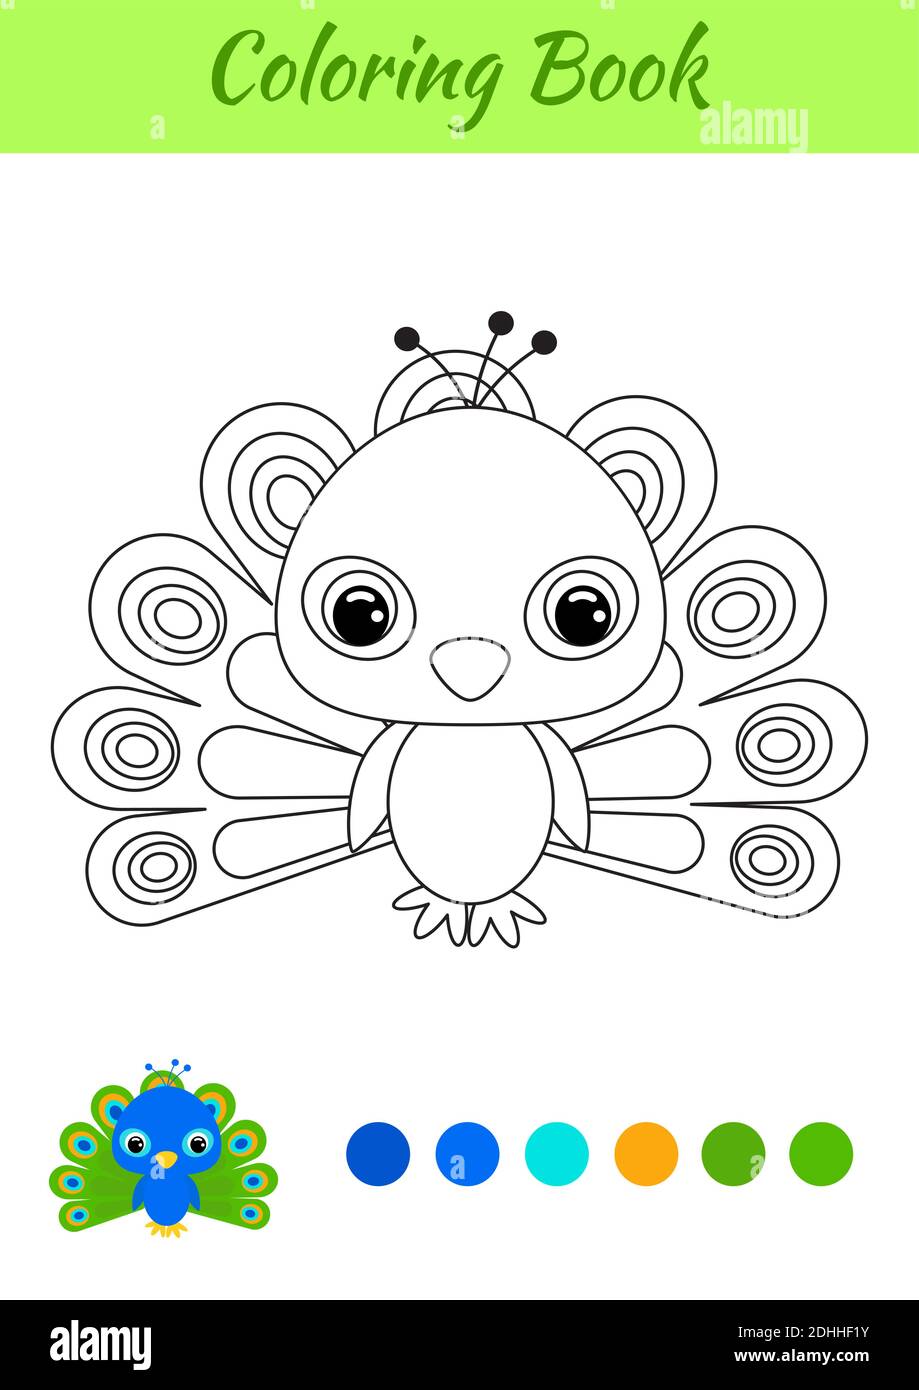 Coloring book little baby peacock coloring page for kids educational activity for preschool years kids and toddlers with cute animal stock vector image art